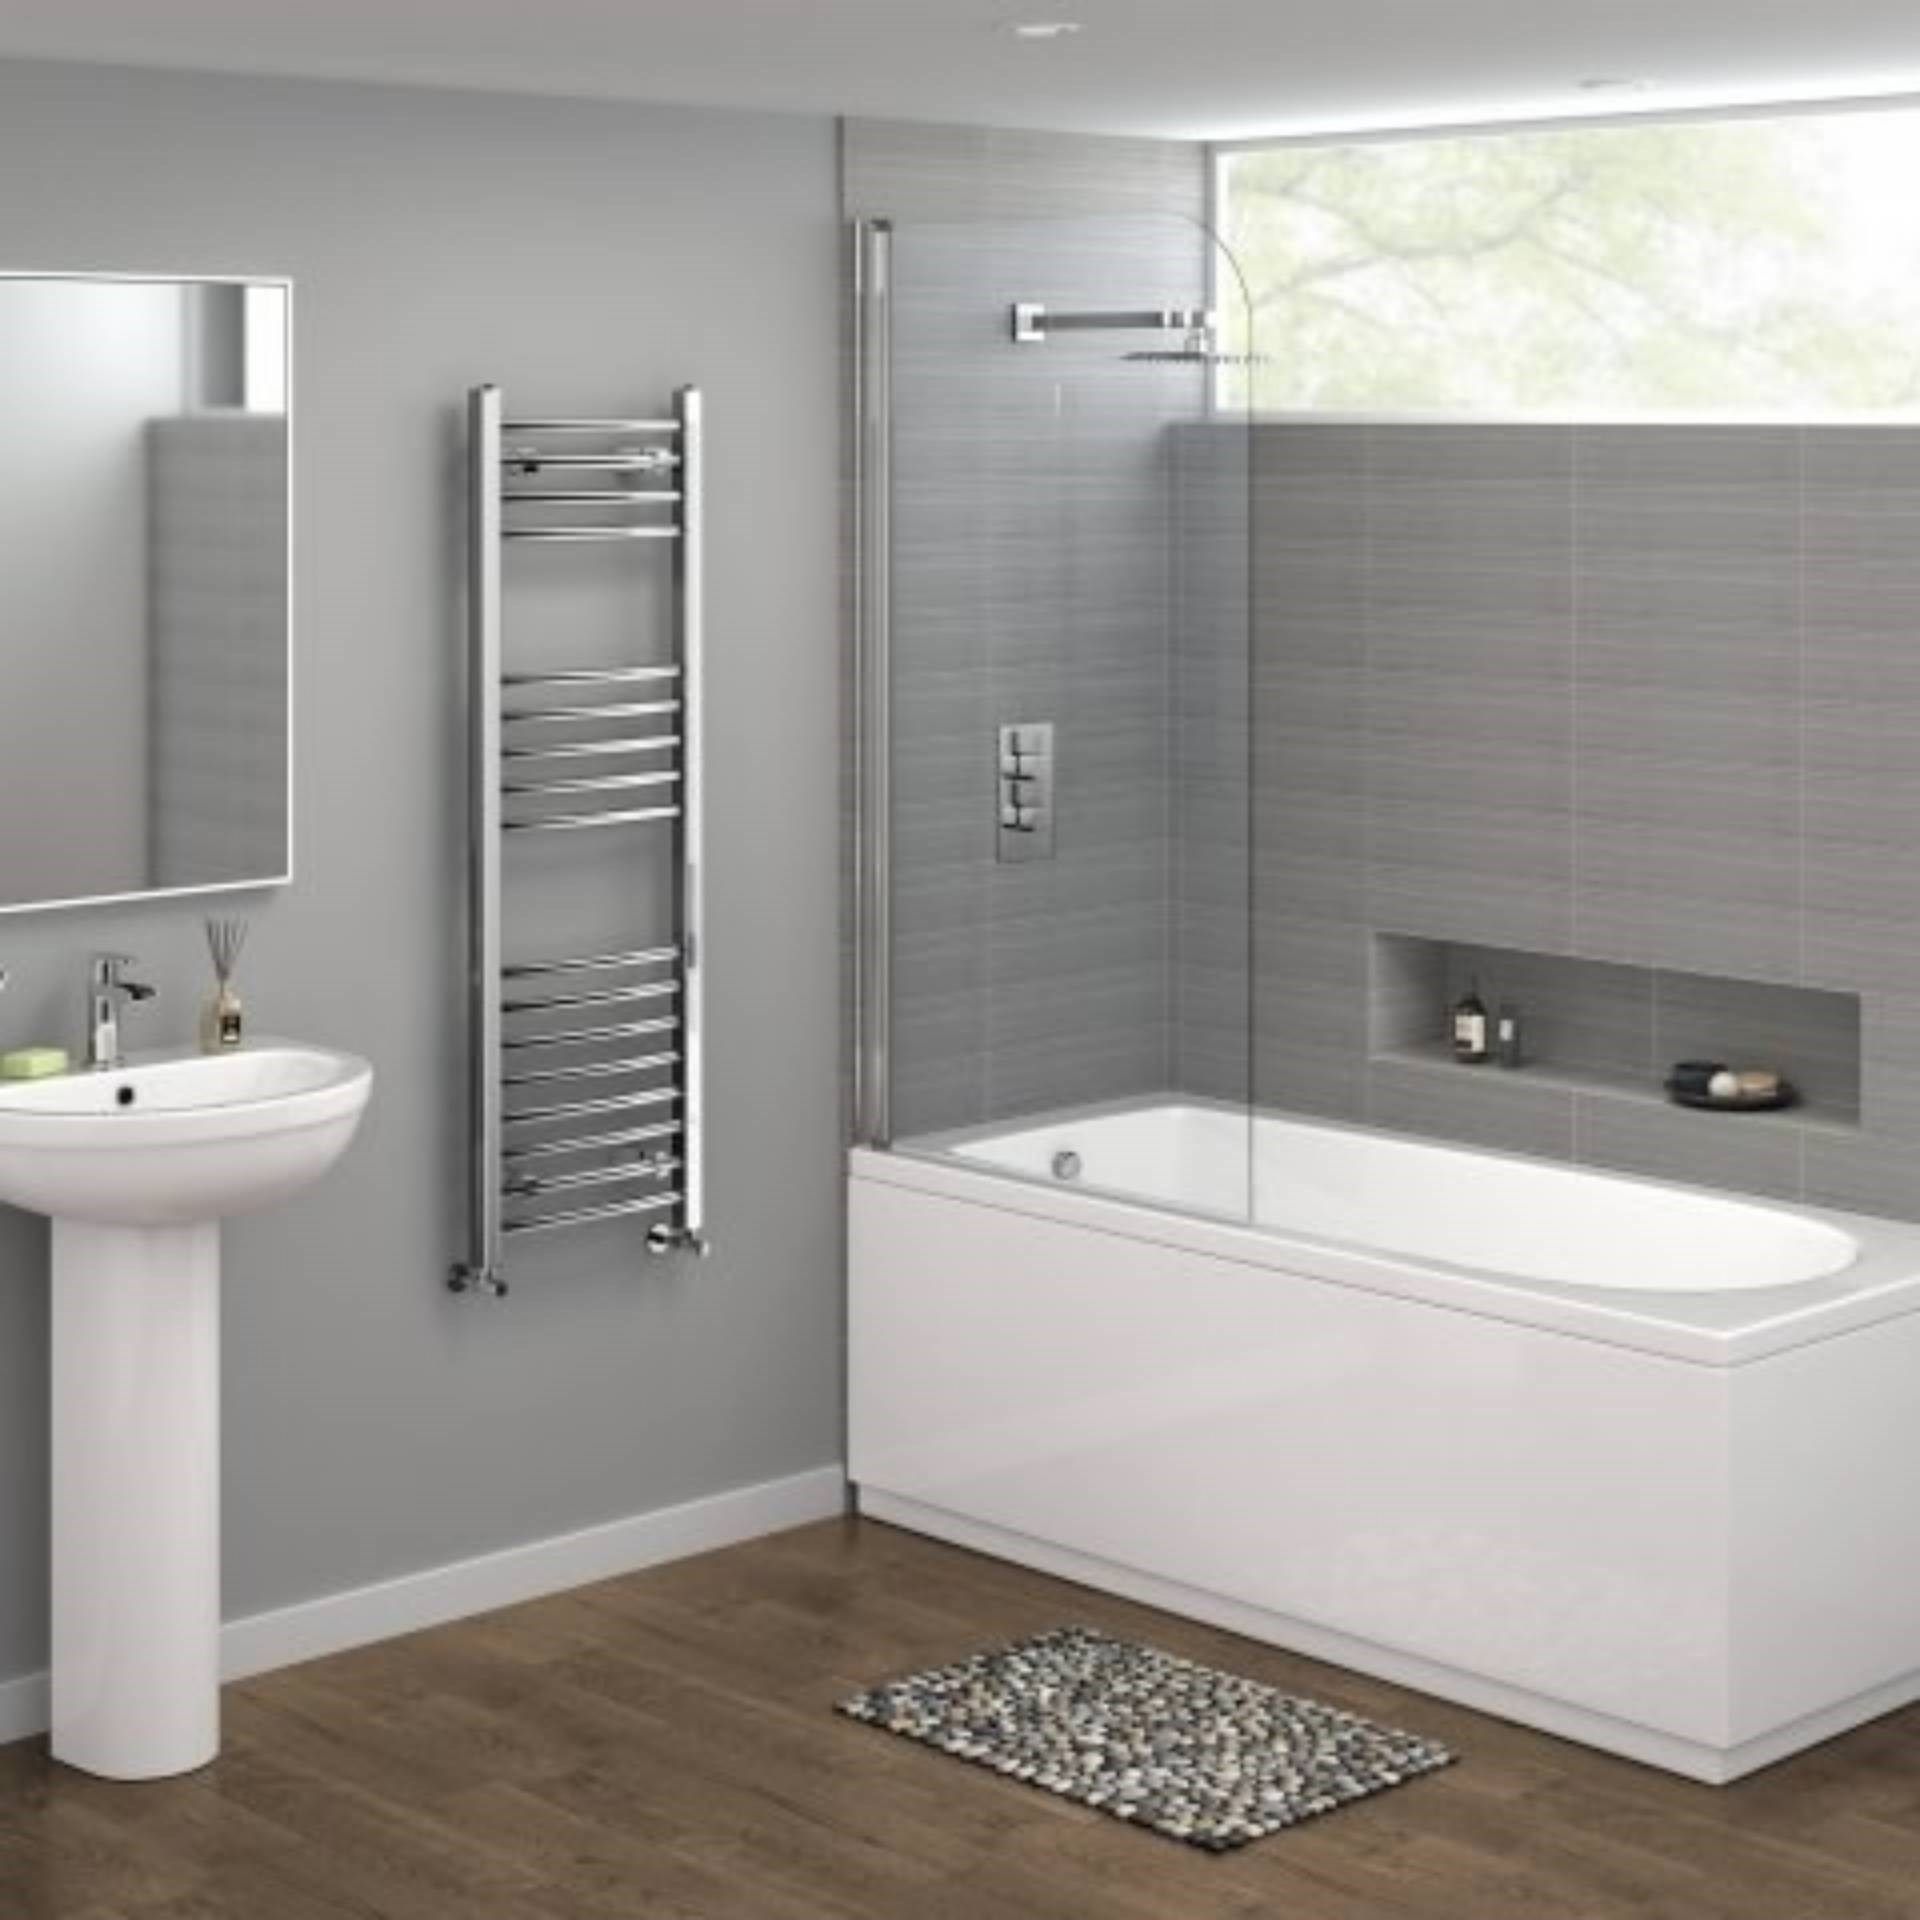 BRAND NEW BOXED 1200x400mm - 20mm Tubes - Chrome Curved Rail Ladder Towel Radiator. NC1200400.Our - Image 2 of 2